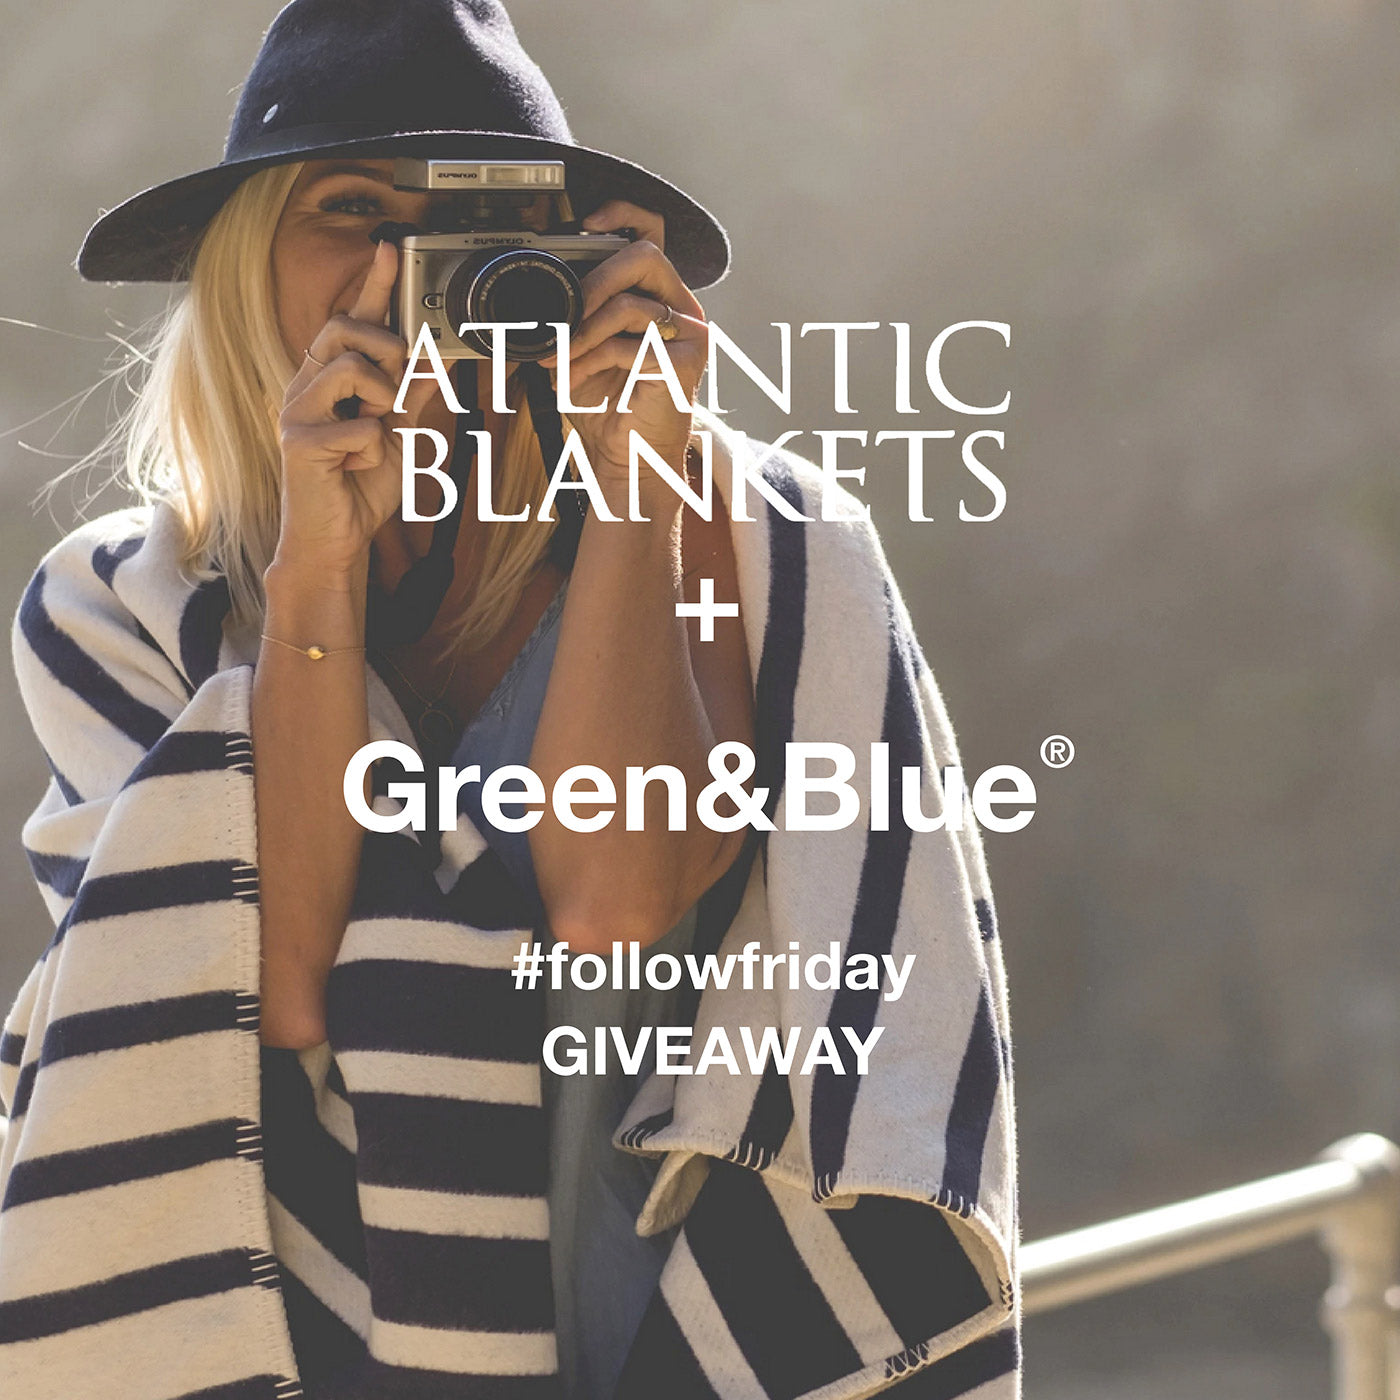 Green&Blue and atlantic blankets competition image